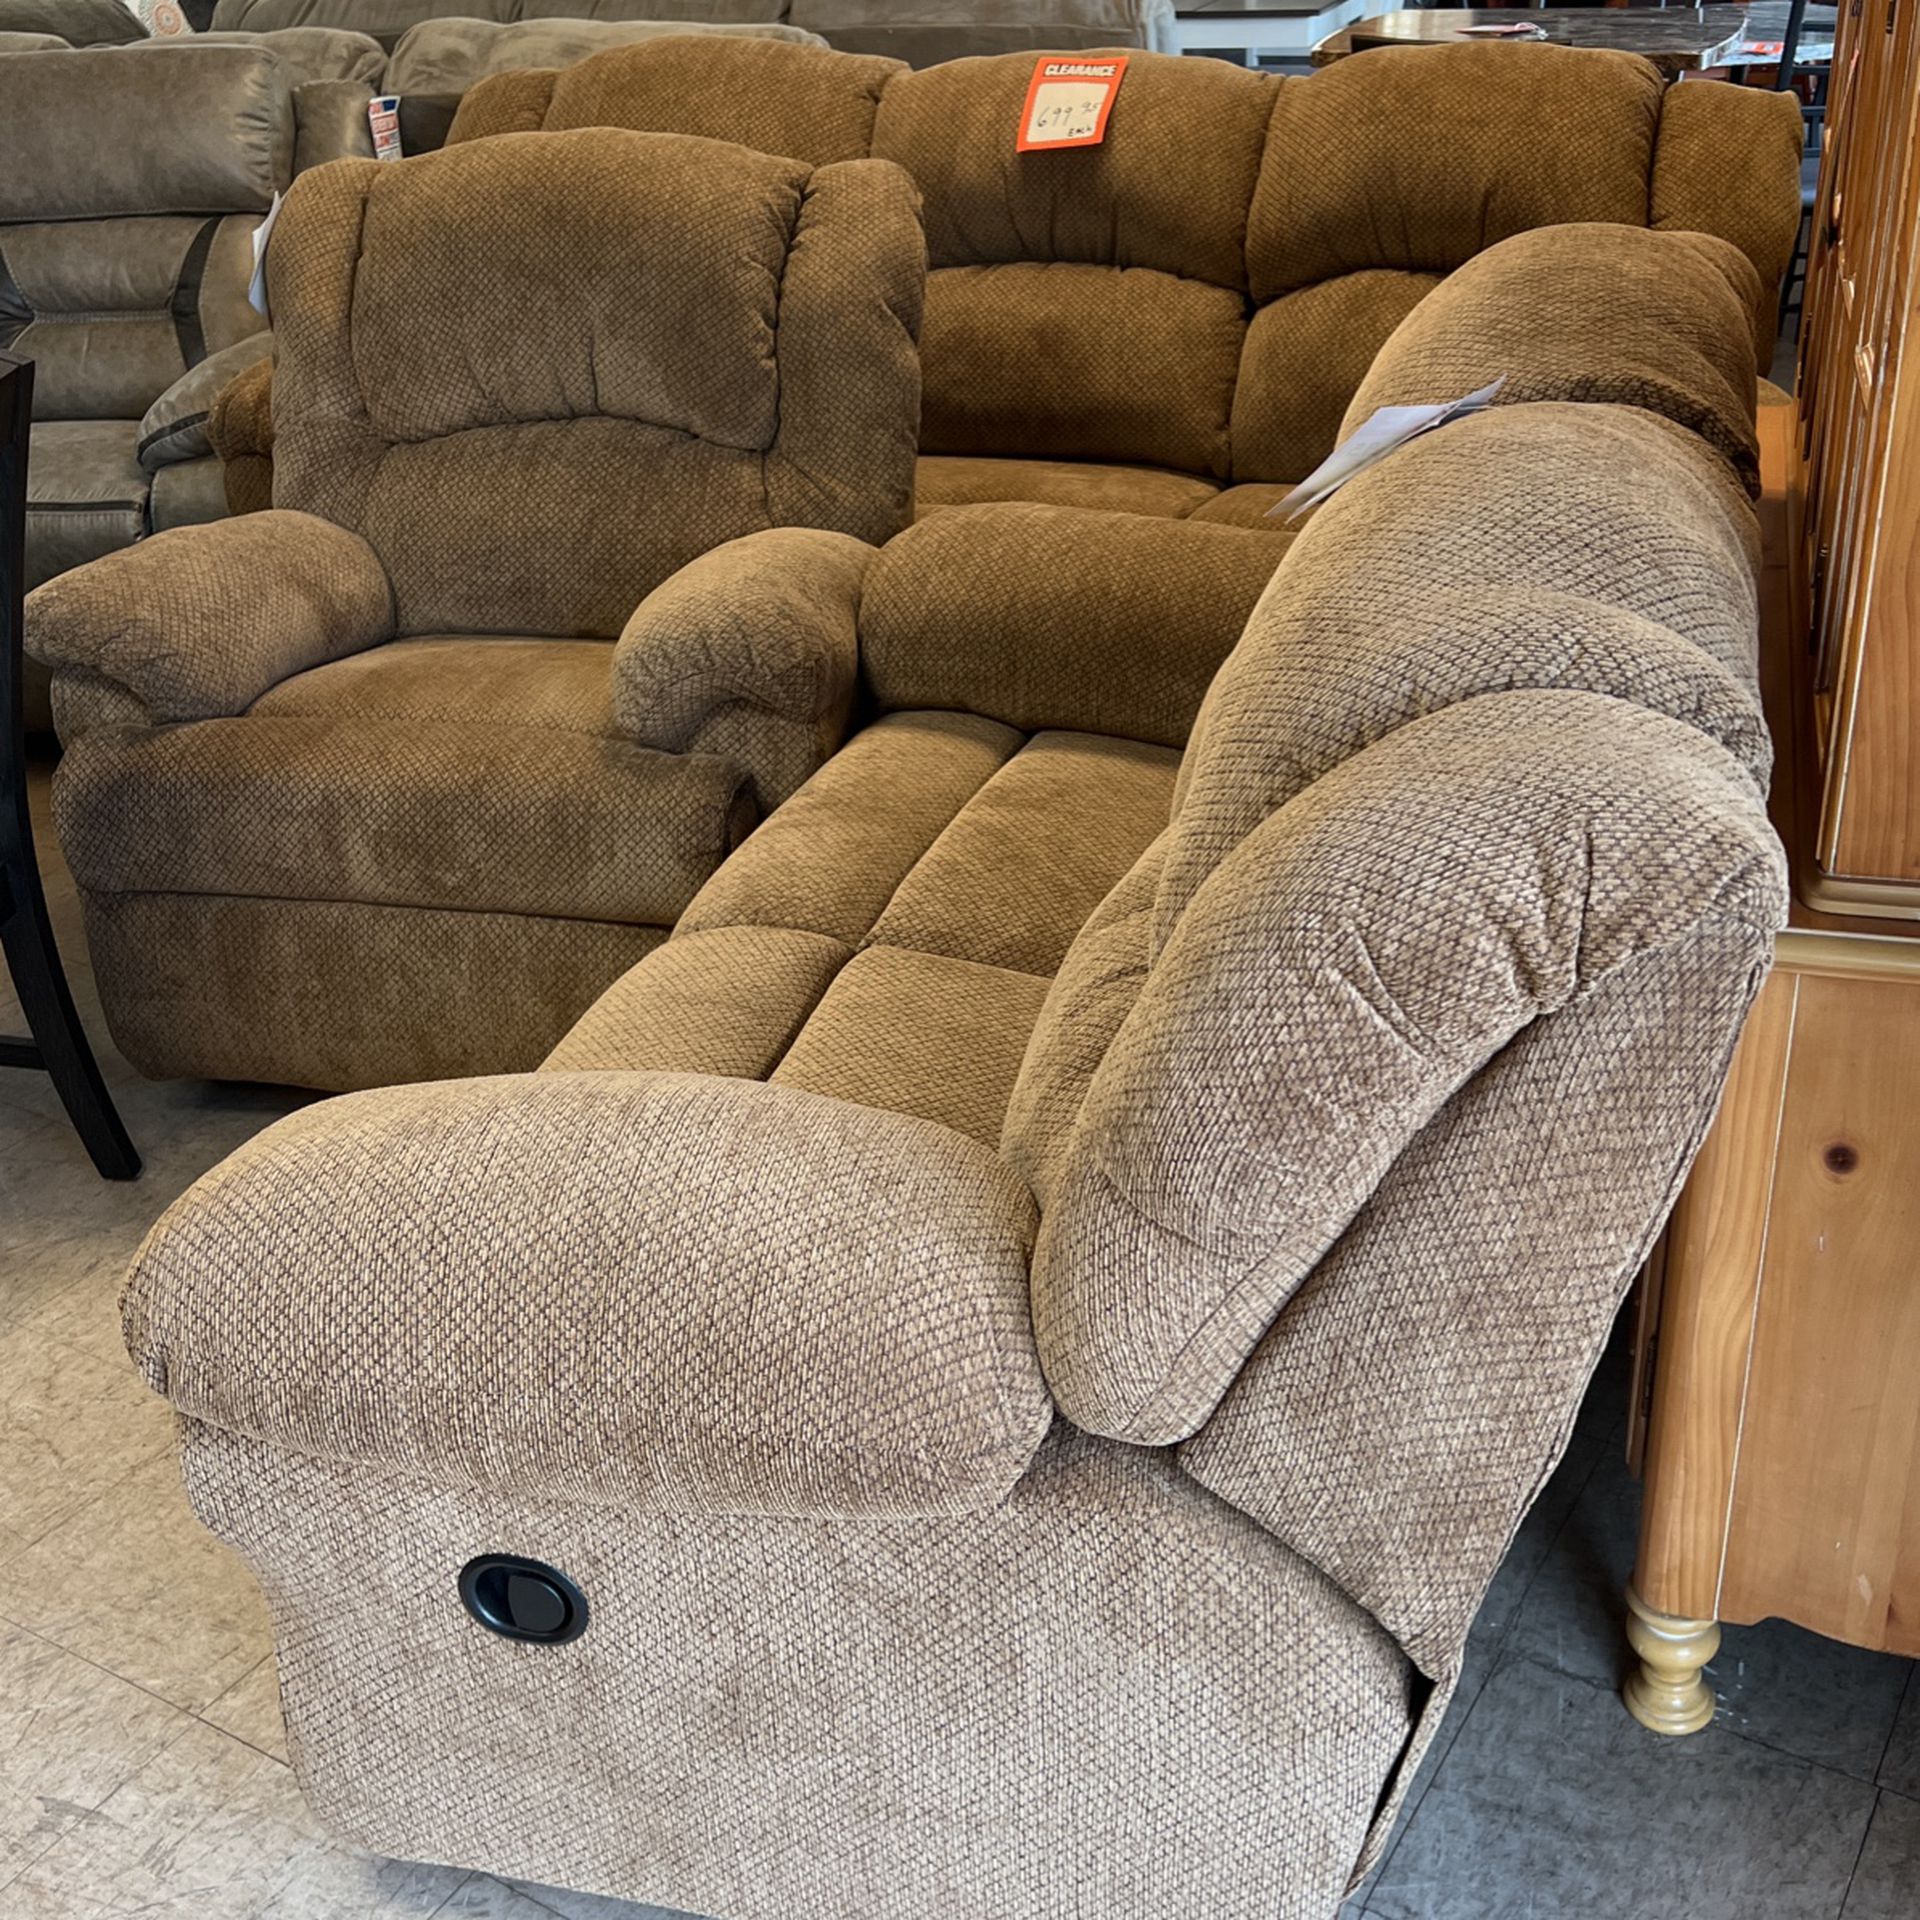 Brand new recliner couch for 699 recliner loveseat for 699 recliner chair for 399 it rocks to brand new cash only